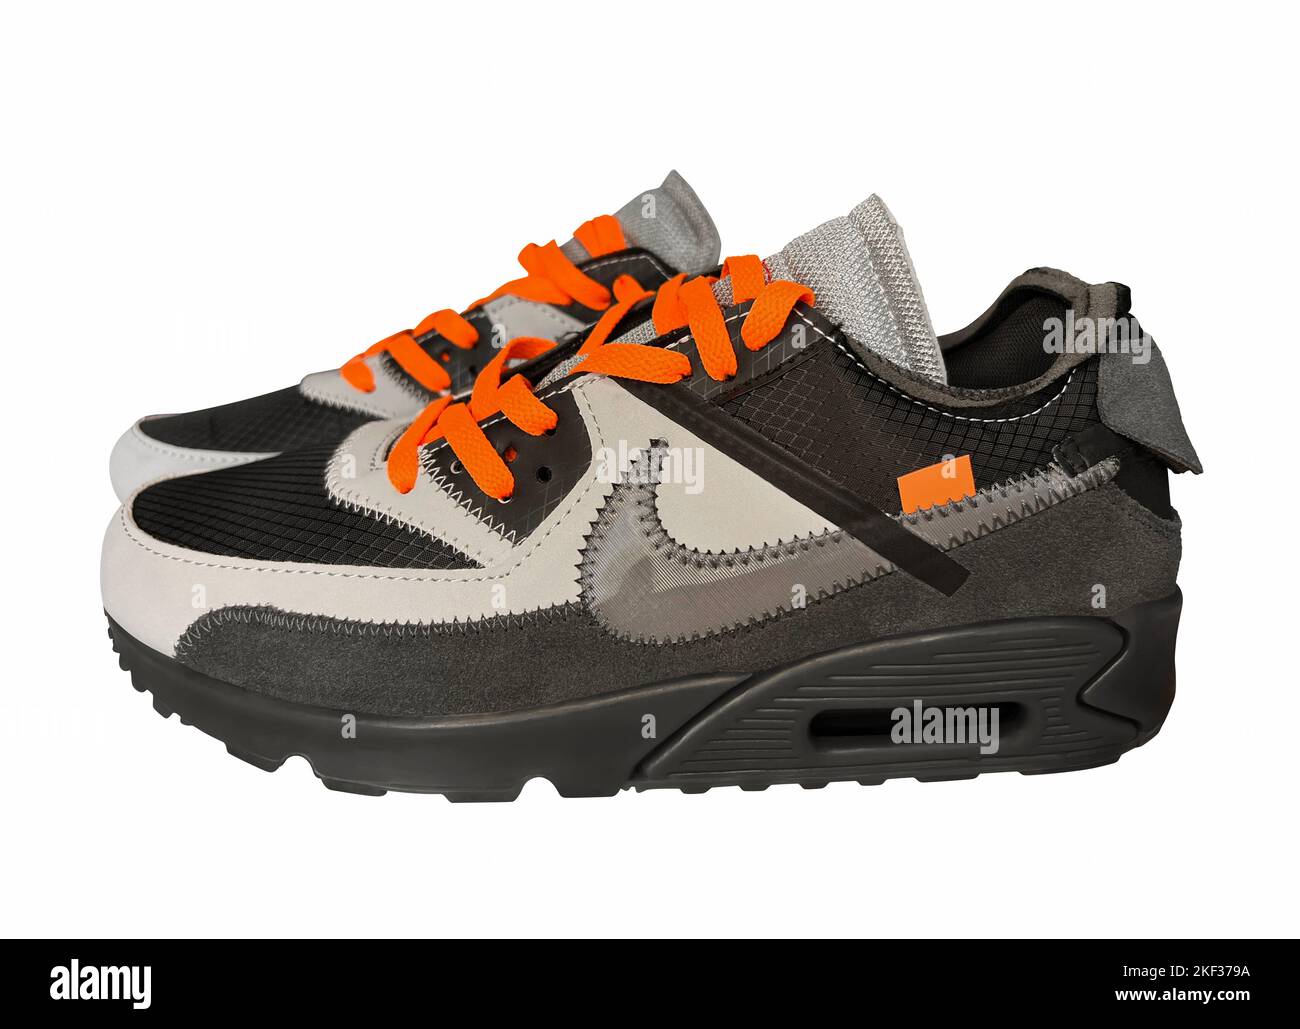 Almaty, Kazakhstan - November 12, 2022: Nike air max 90 adult's sport shoes. Sneakers isolated on white. Clipping Path included. Stock Photo